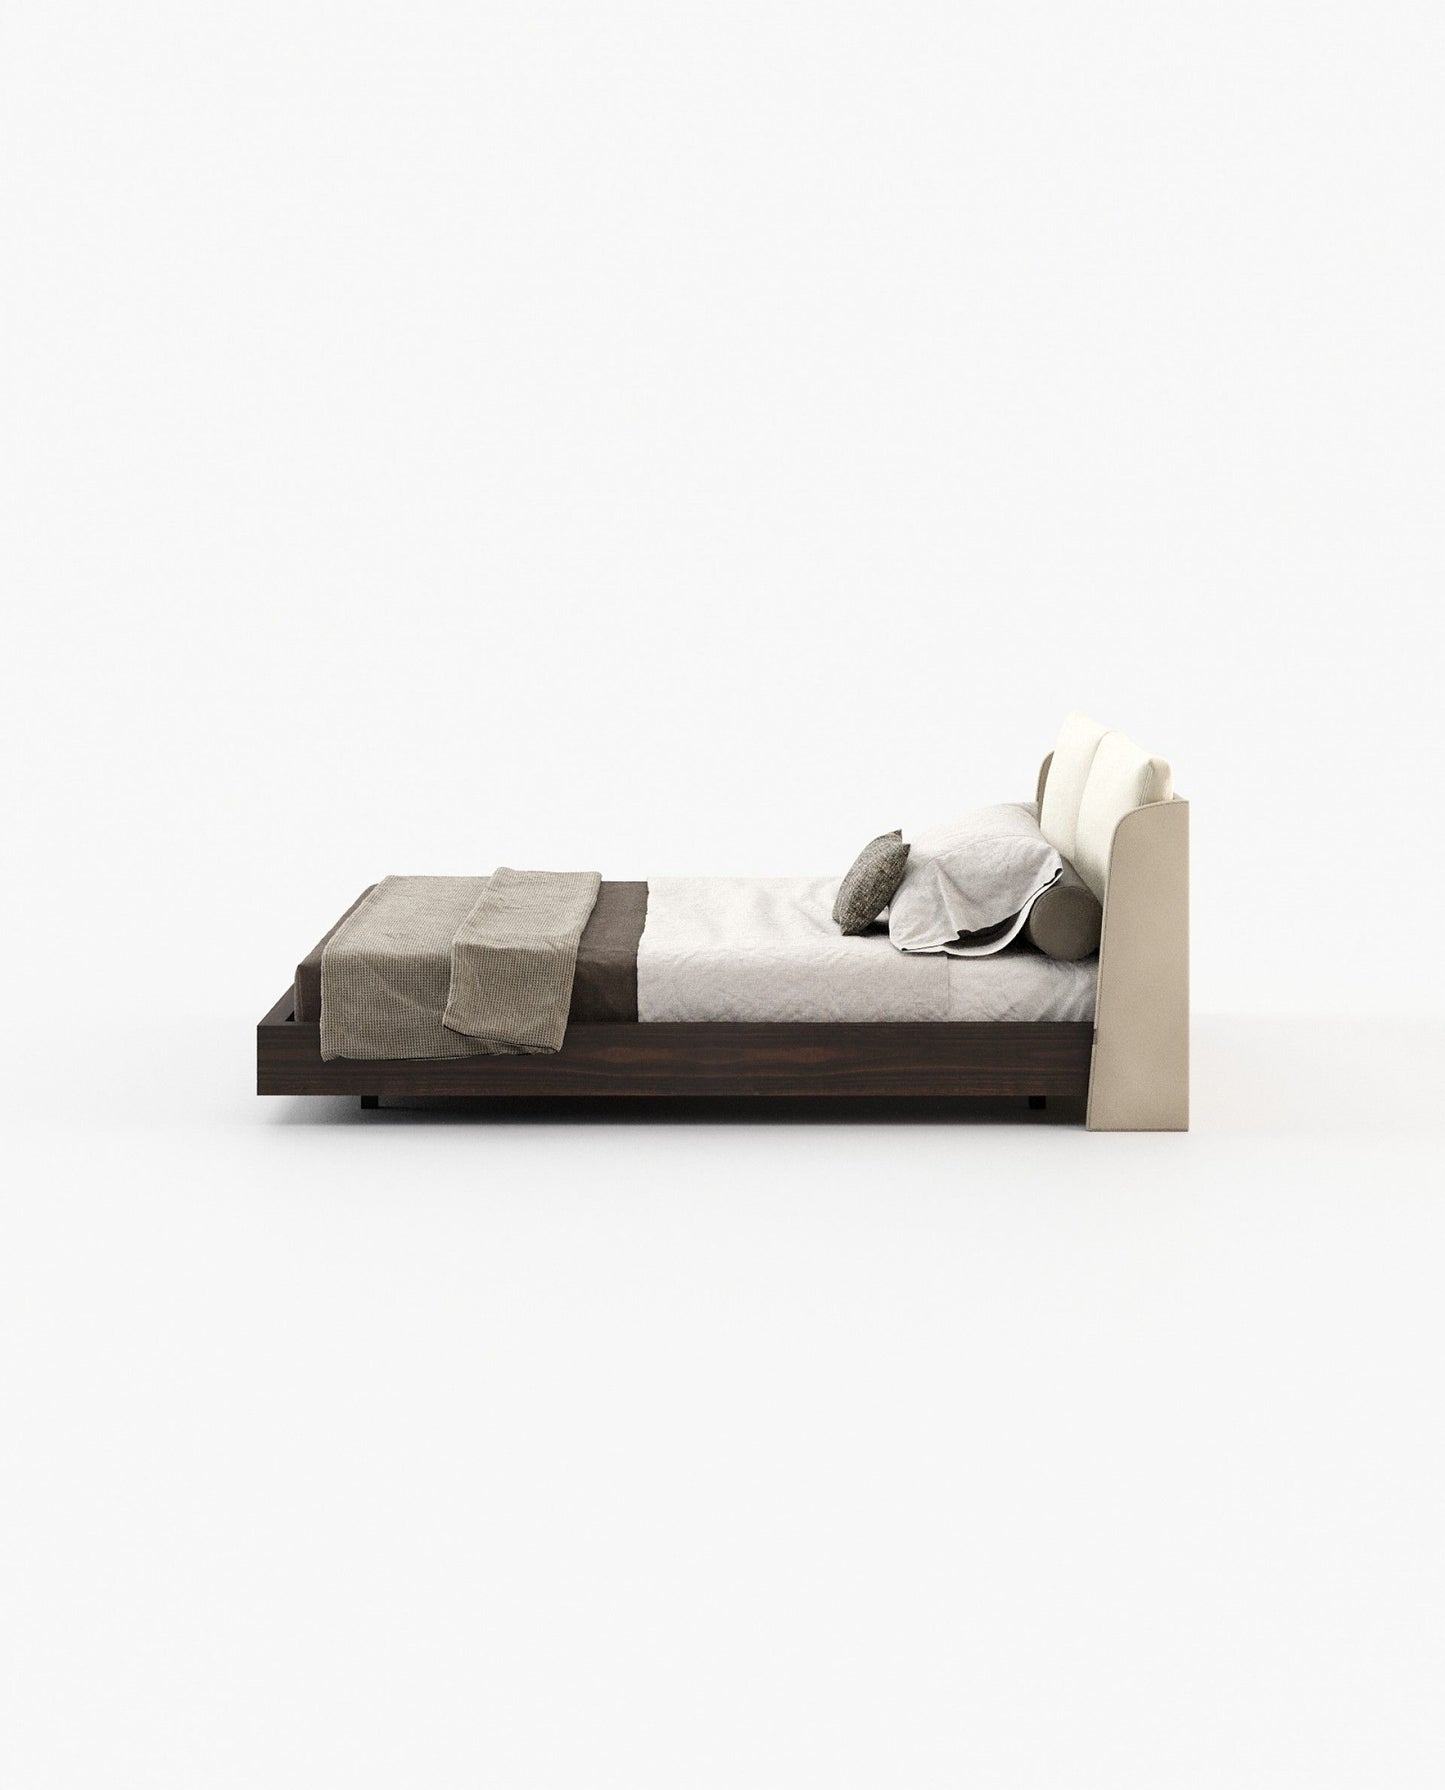 Amsterdam Bed | Dolci Home